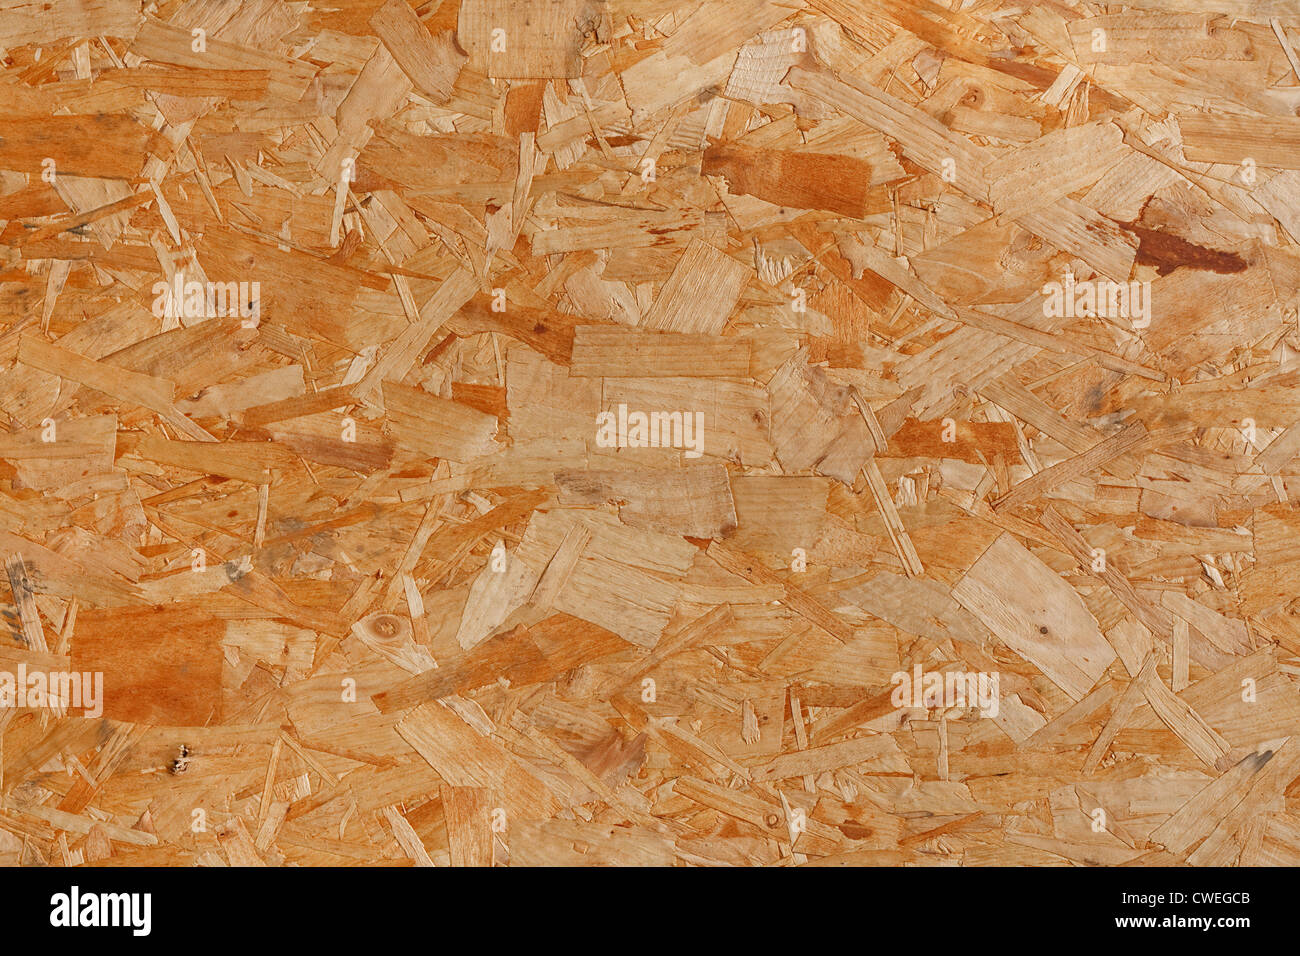 Plywood background of oriented strand board or OSB, great for builders and boarding up windows etc Stock Photo